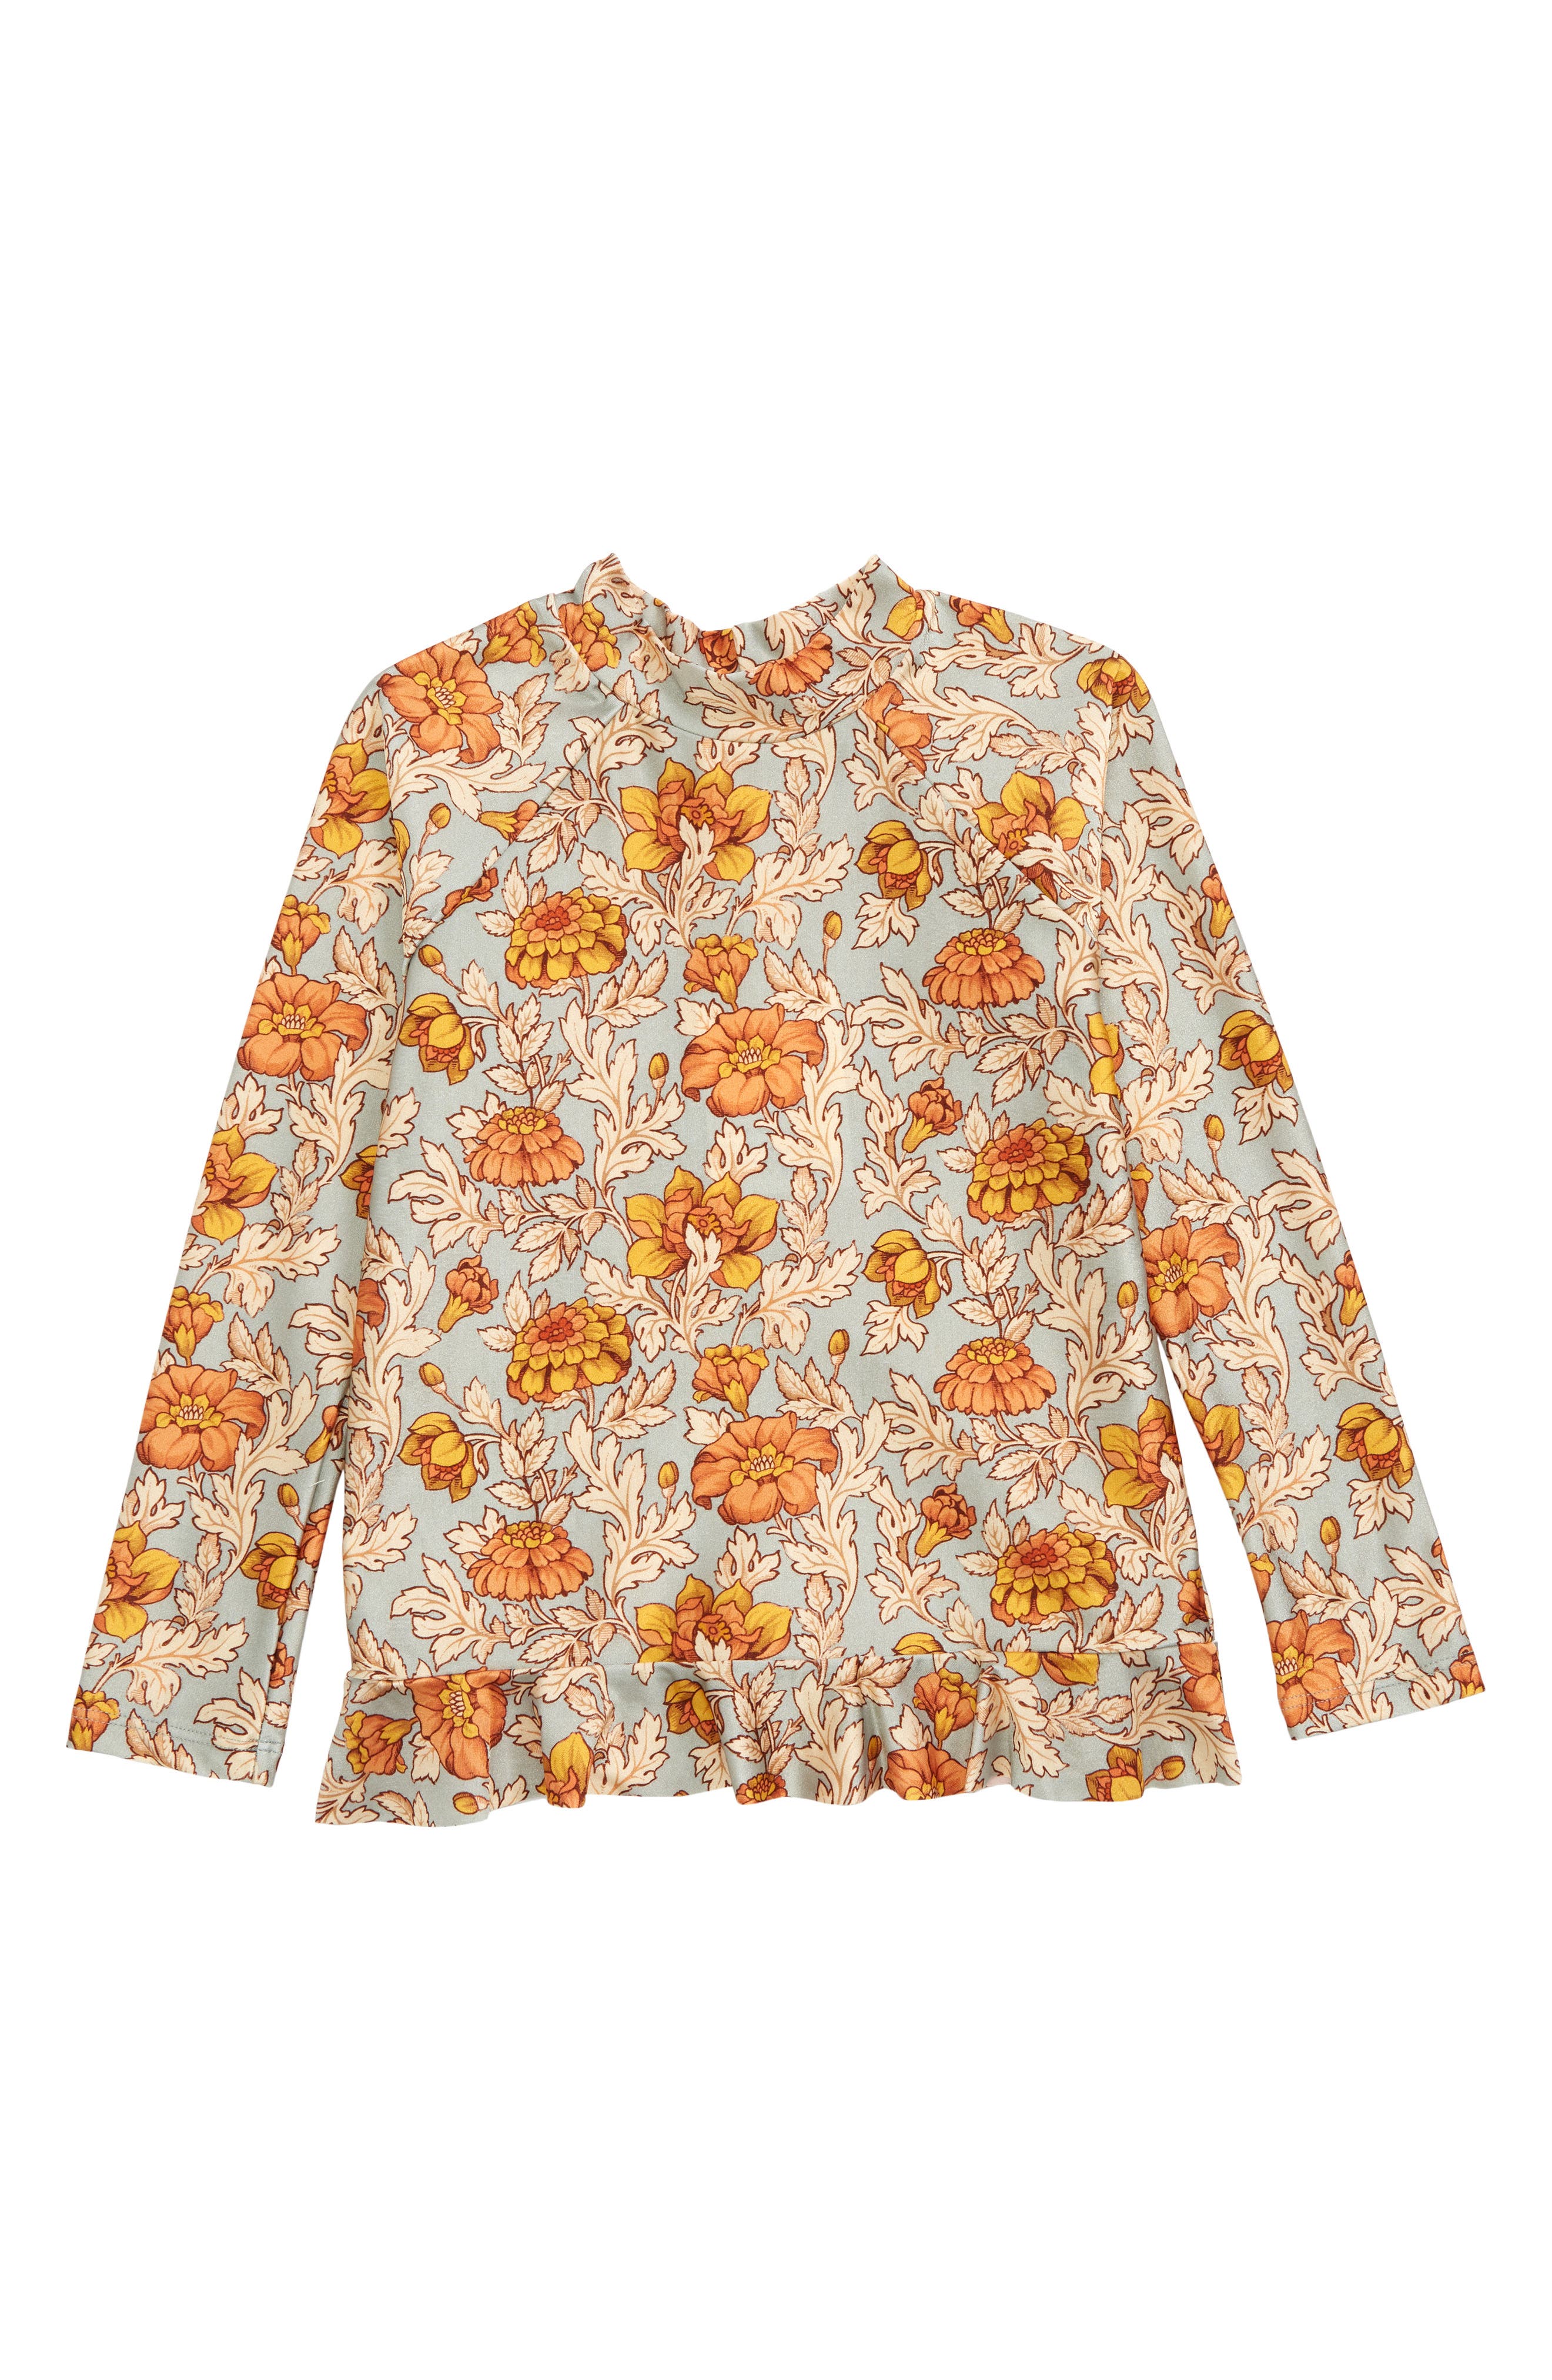 Zimmermann Kids' Andie Floral Long Sleeve Rashguard Top in Dusty Blue Floral at Nordstrom, Size 1Y Us